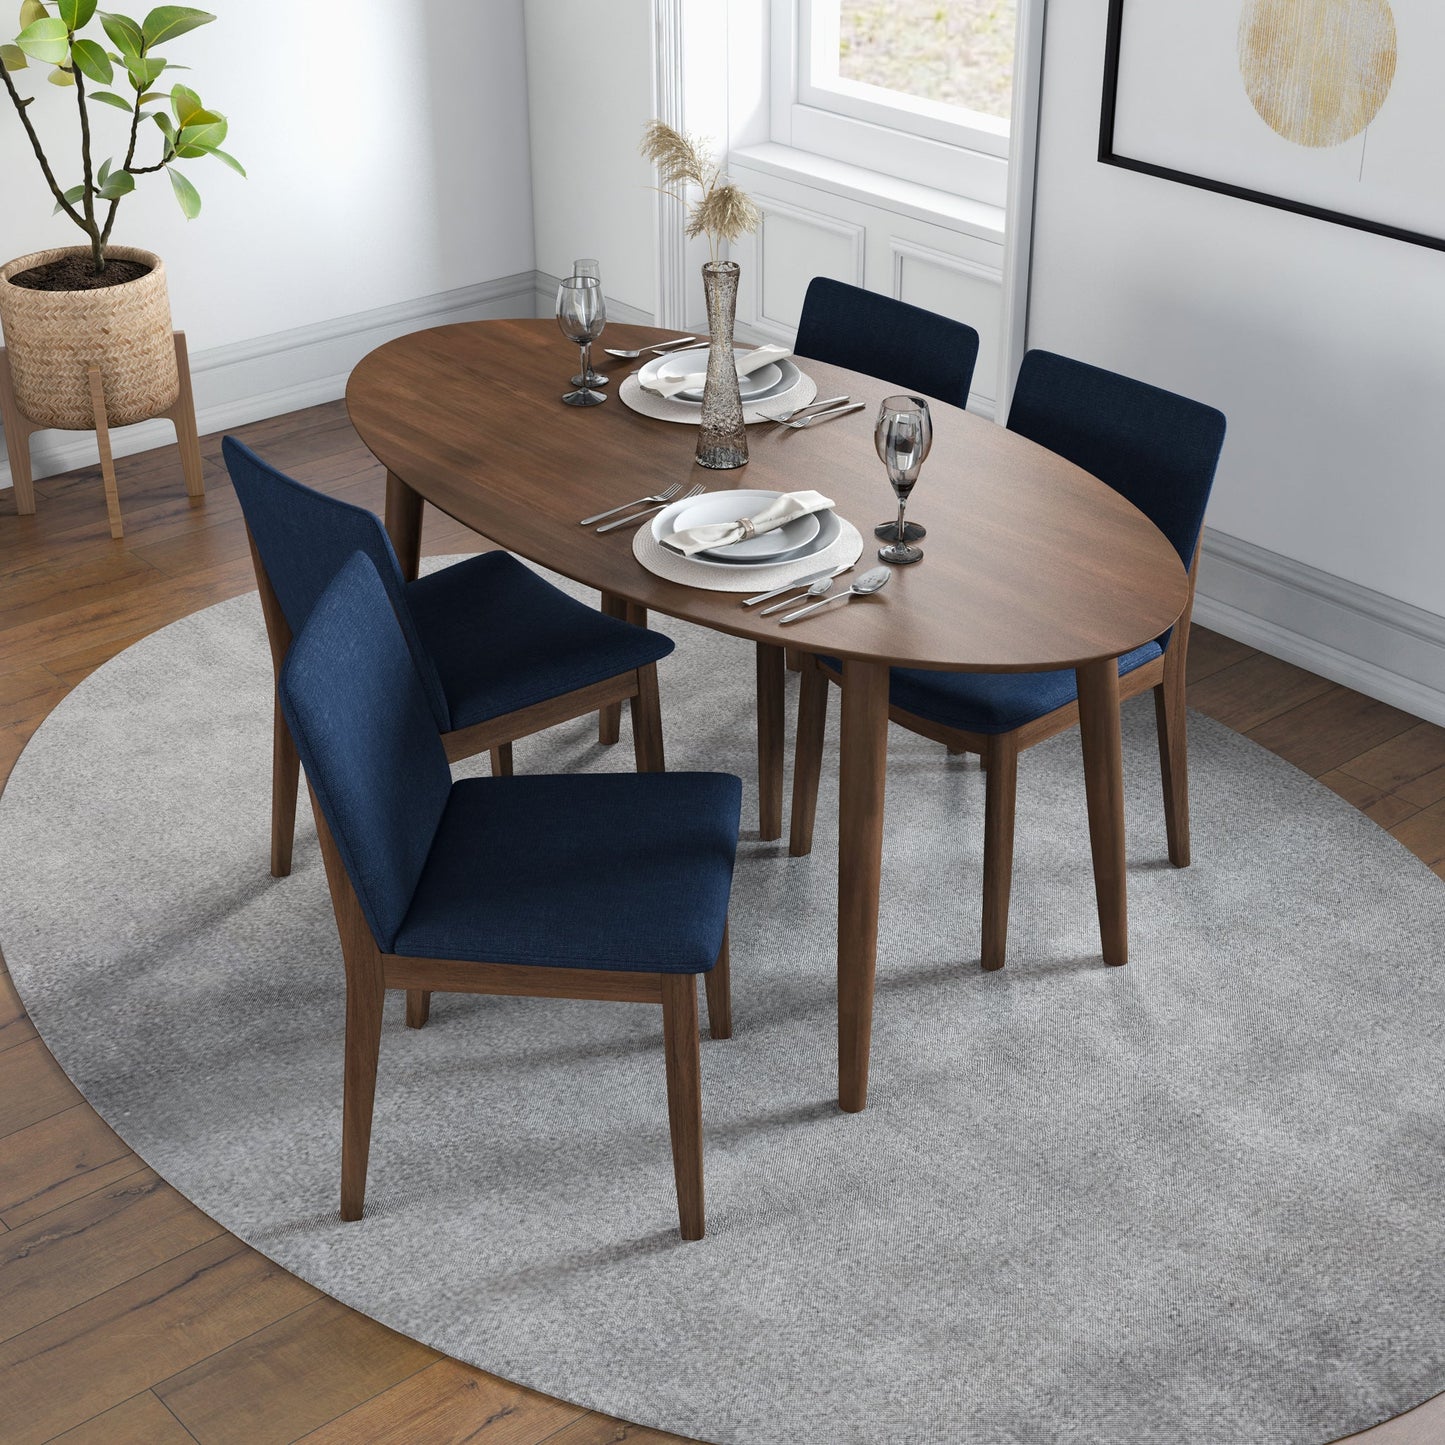 Dining set, Rixos Walnut Table with 4 Virginia Blue Fabric Chairs